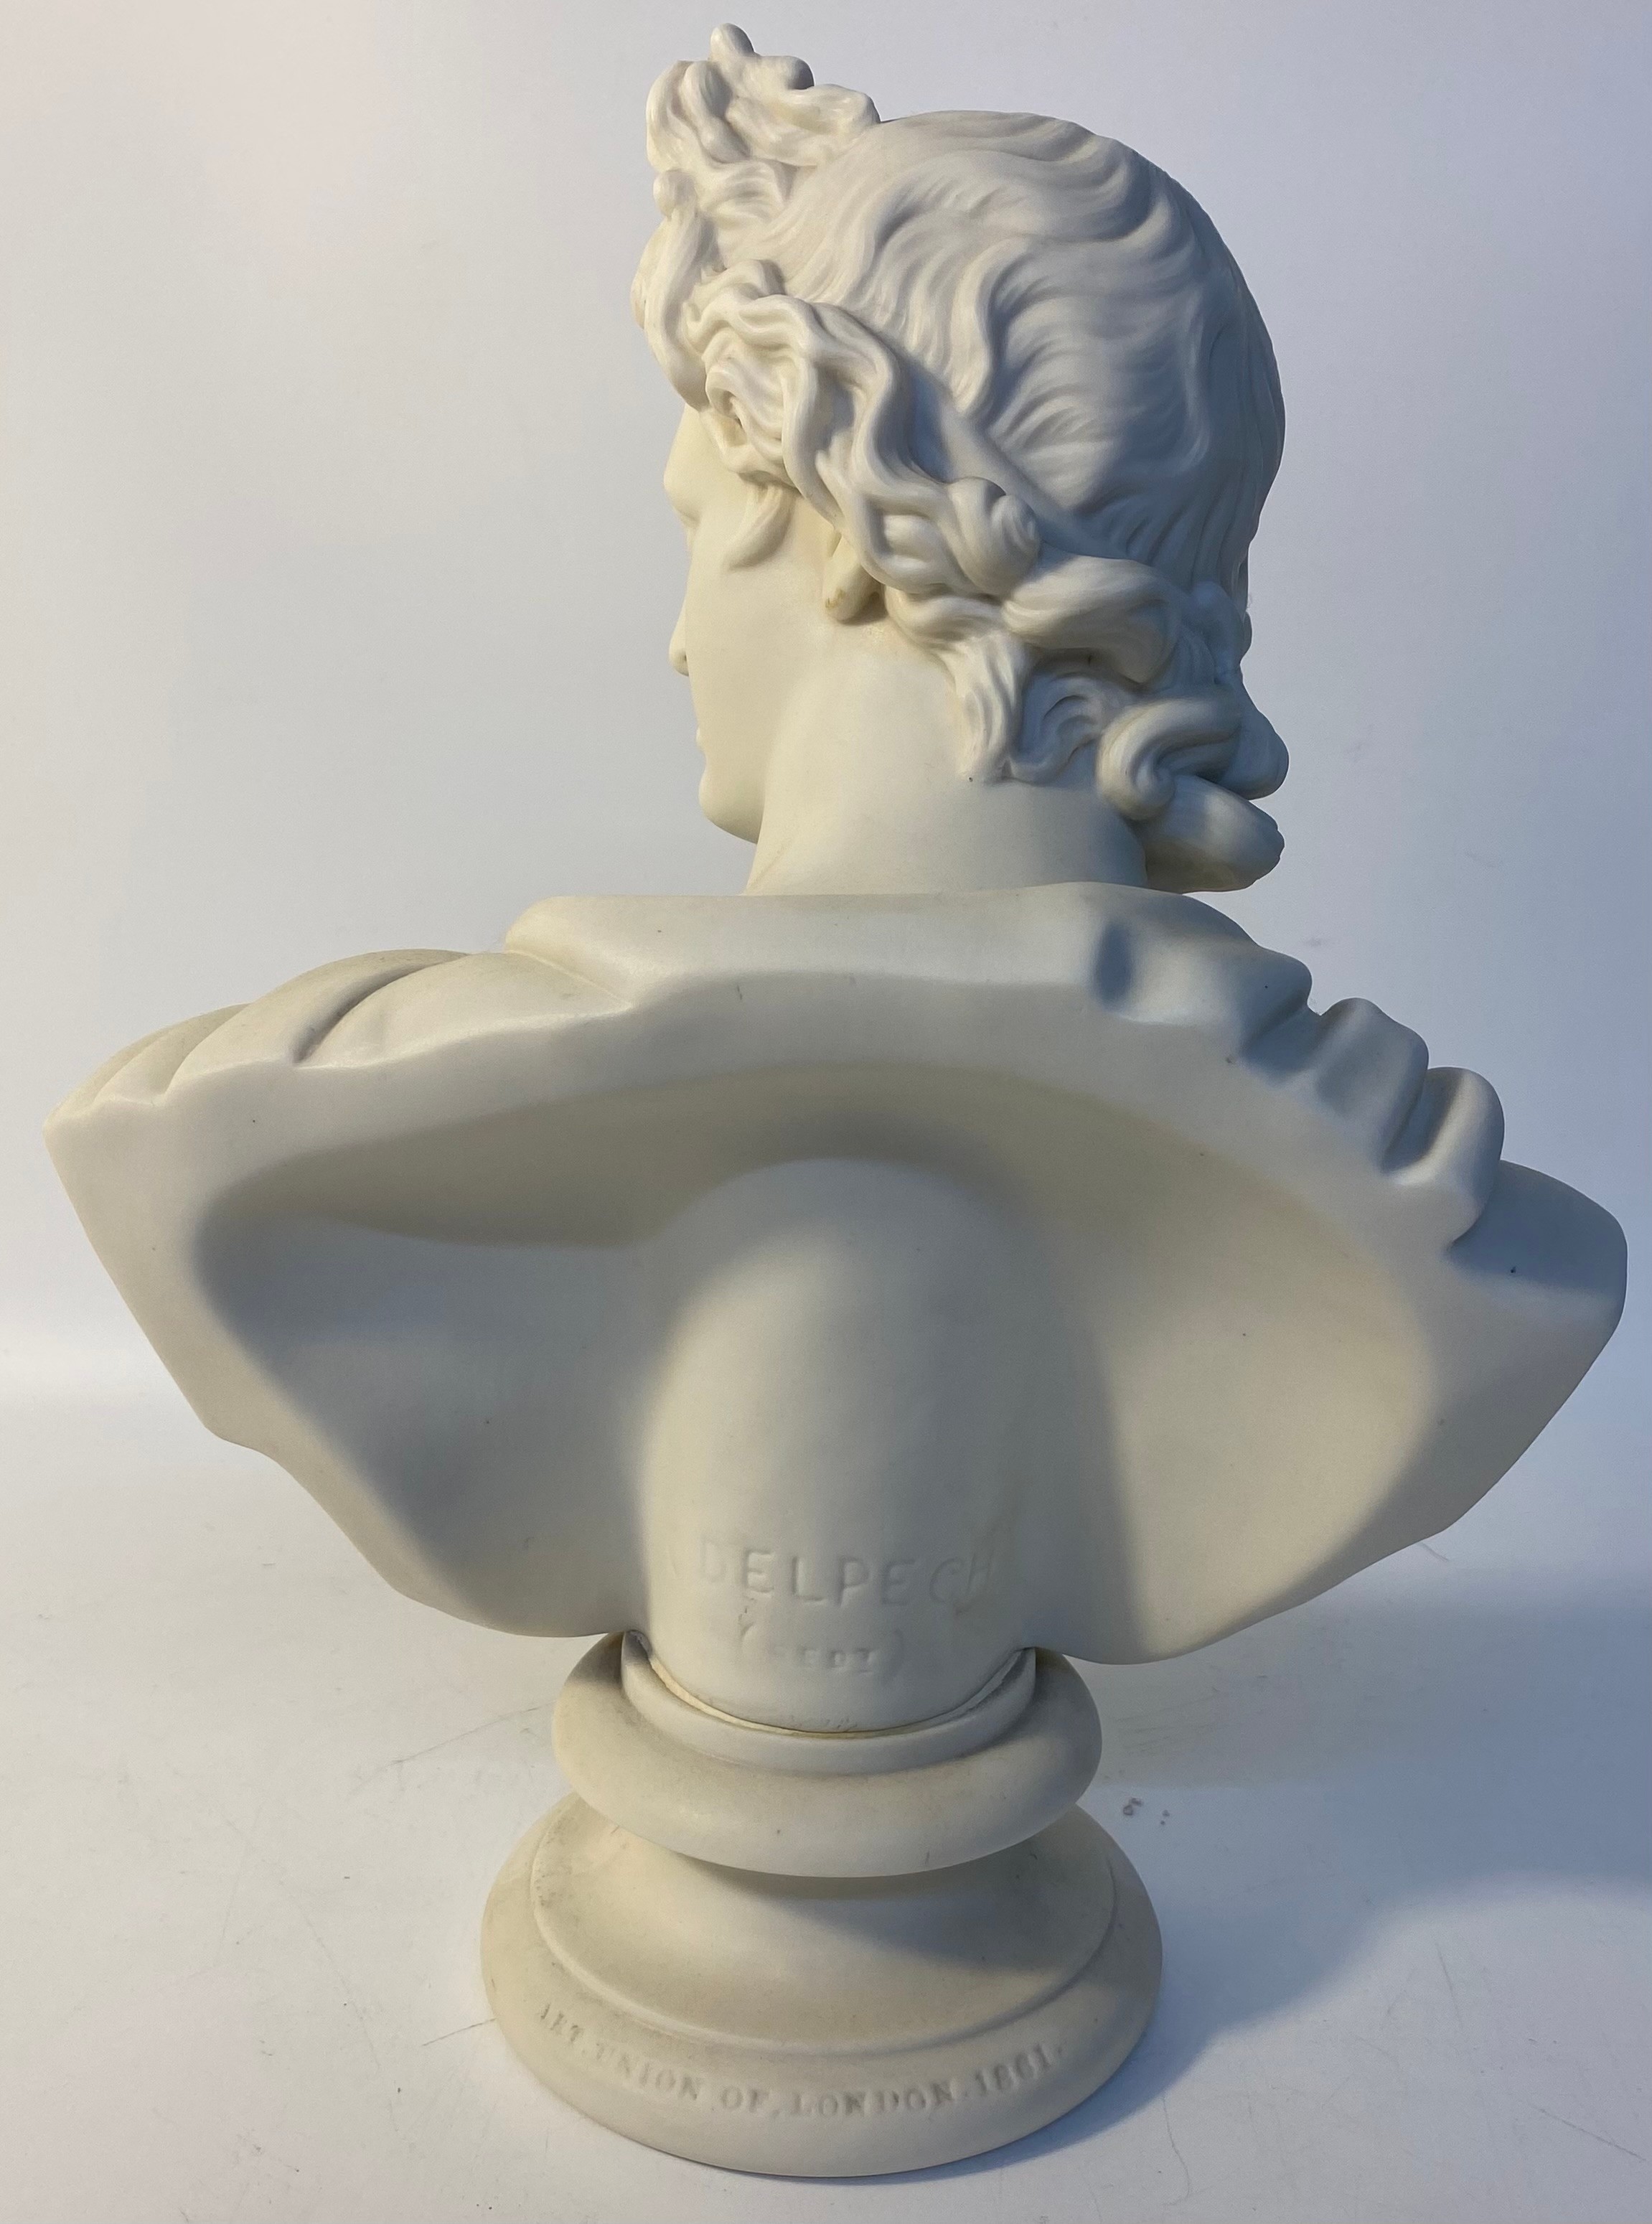 Parian Ware Bust Of Apollo by Delpech [23x35cm] - Image 3 of 5